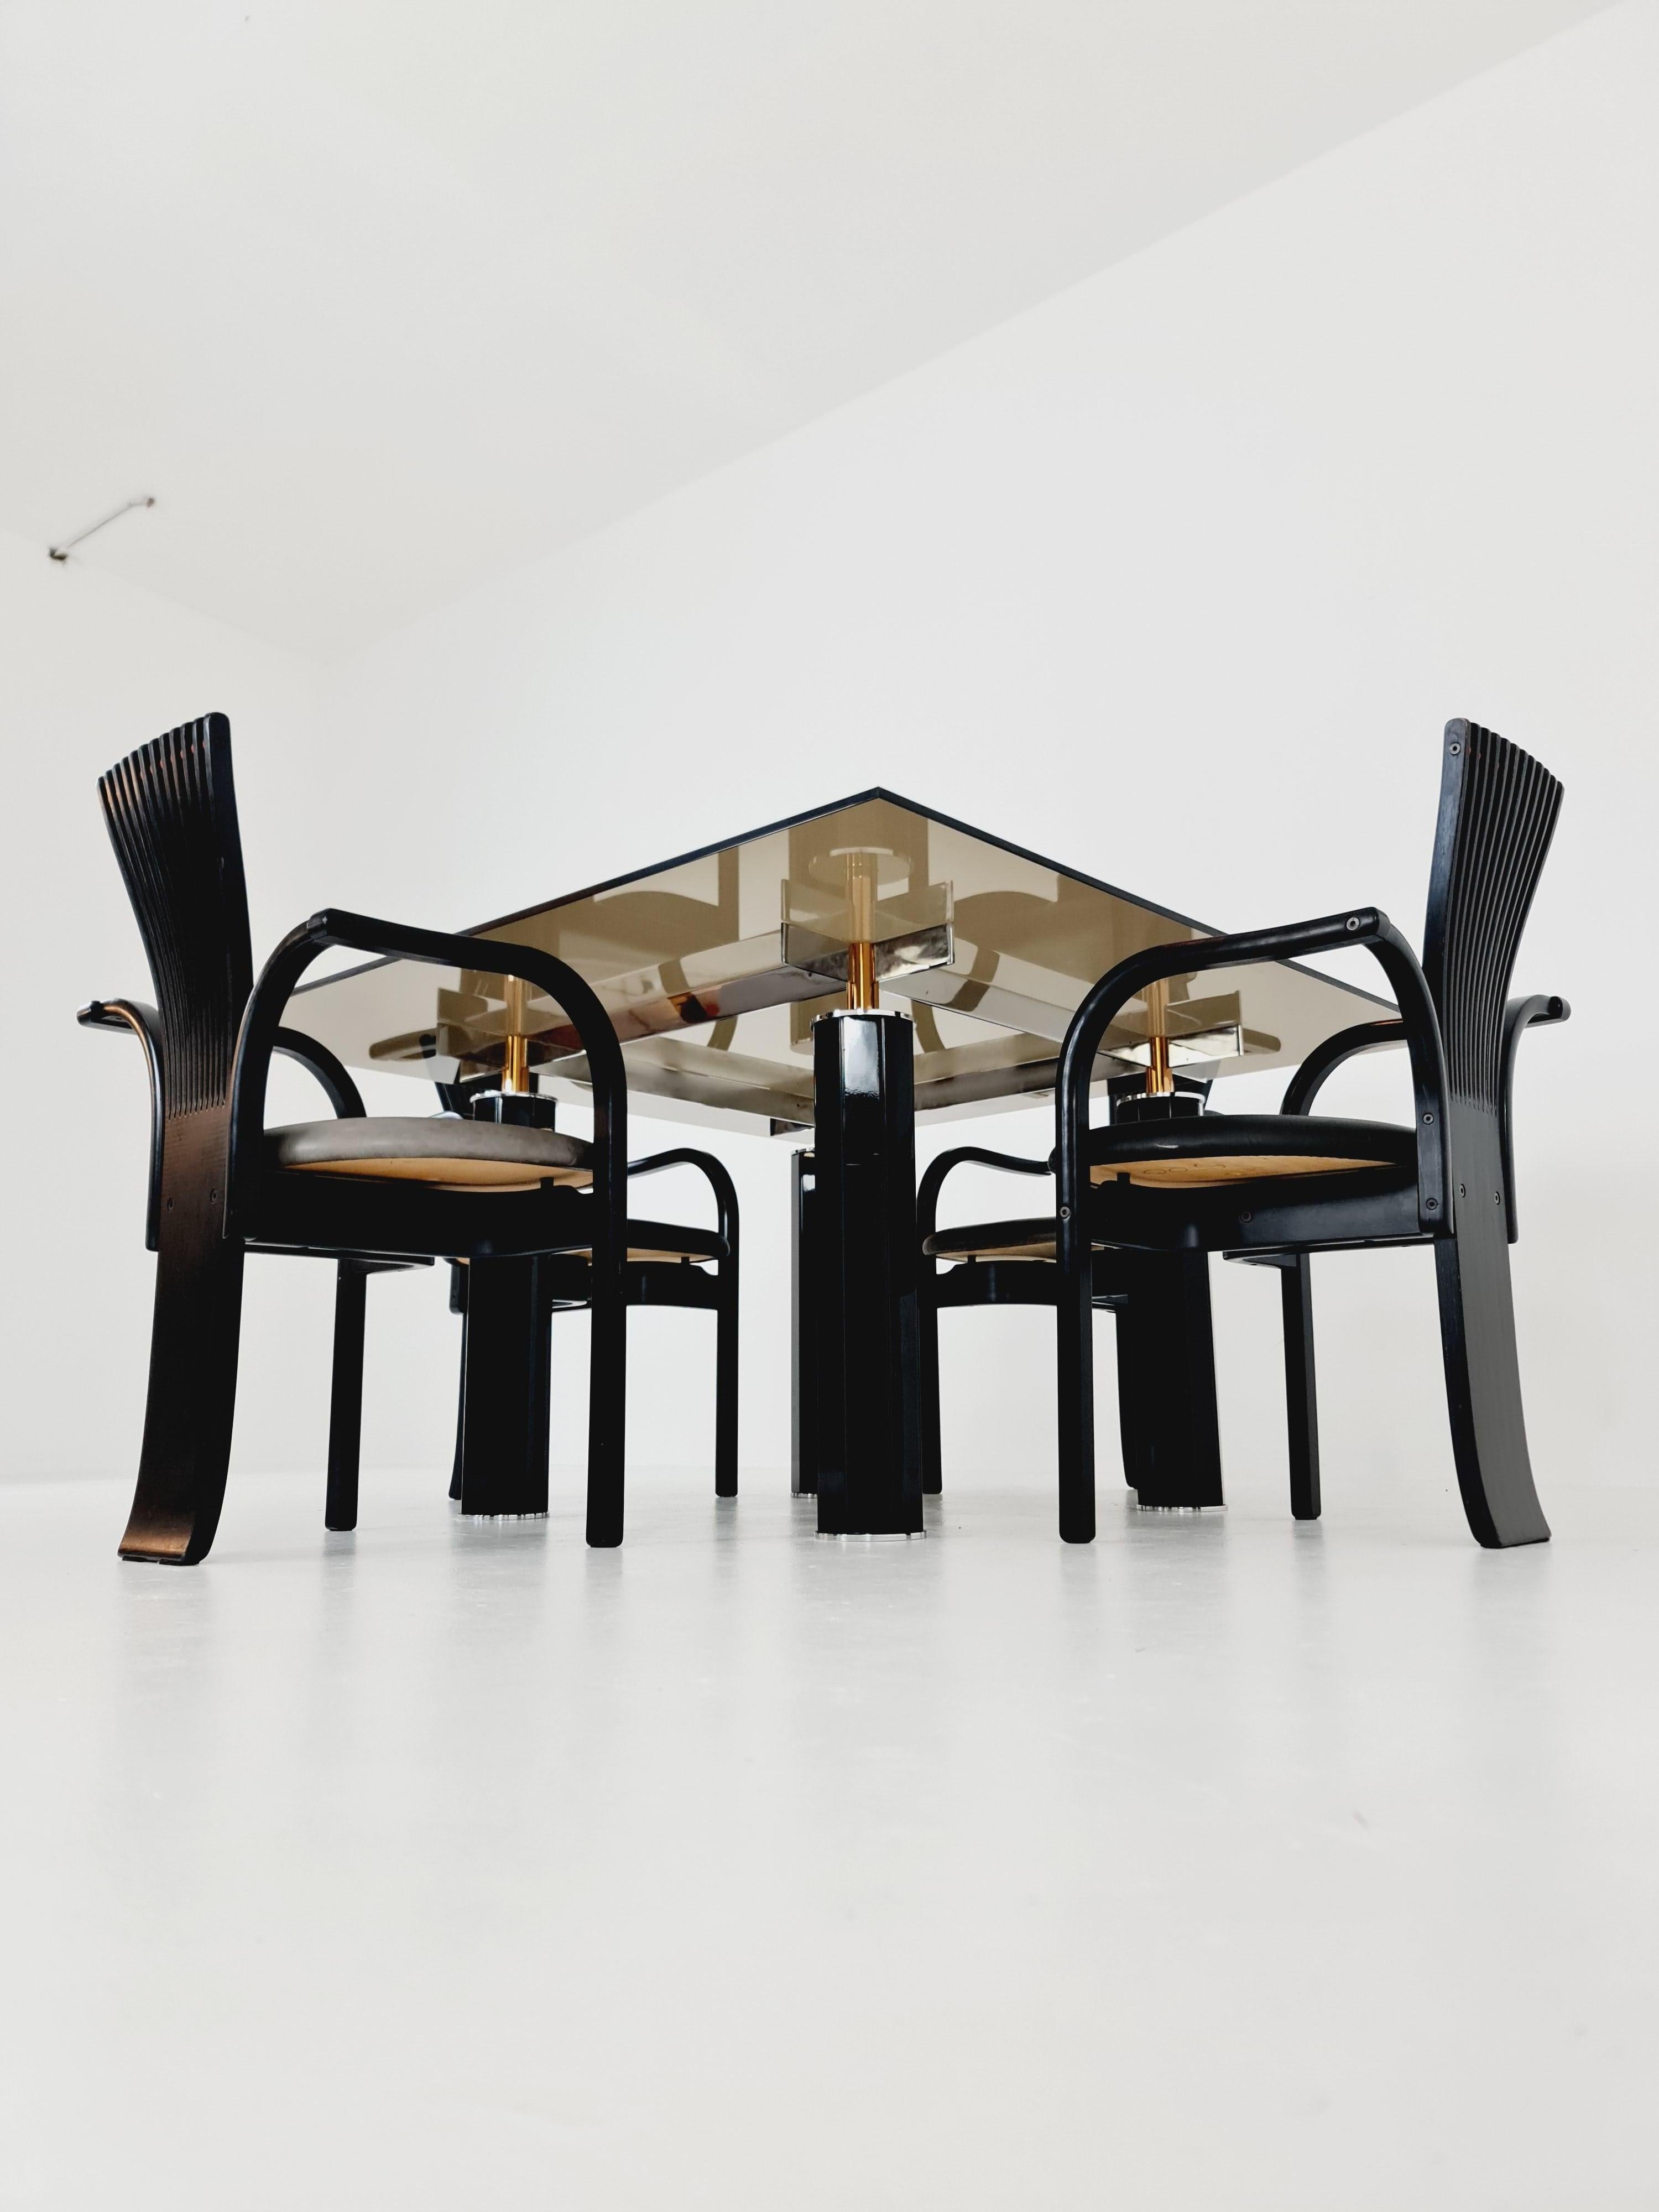 Set of 4 Mid Century Totem dining chairs by Torstein Nilsen for Westnofa with Italian design dining table .Norway 1980s

Beautiful vintage Set of 4 dining chairs, with table ,model Totem, by Torstein Nilsen for Westnofa, Norway.
They are in black